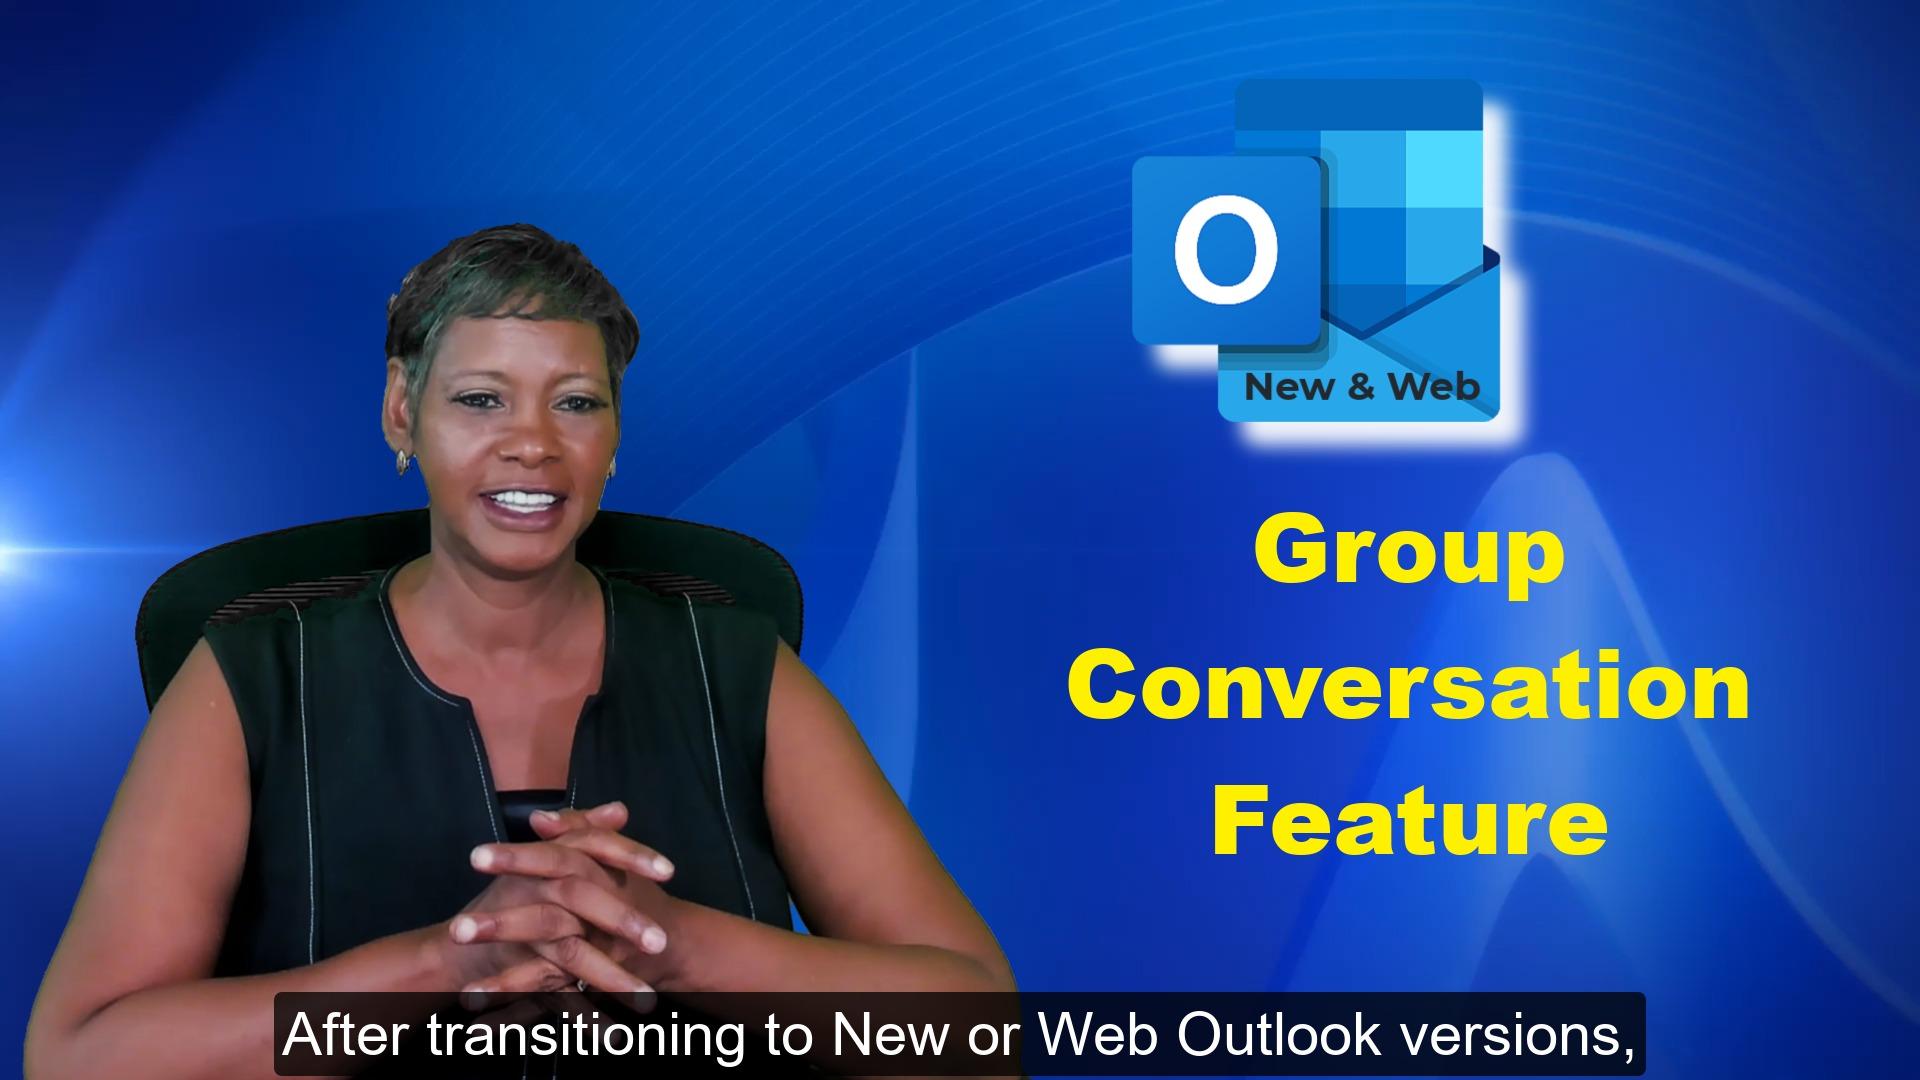 Microsoft New Outlook and Web Version: Group Conversation Feature